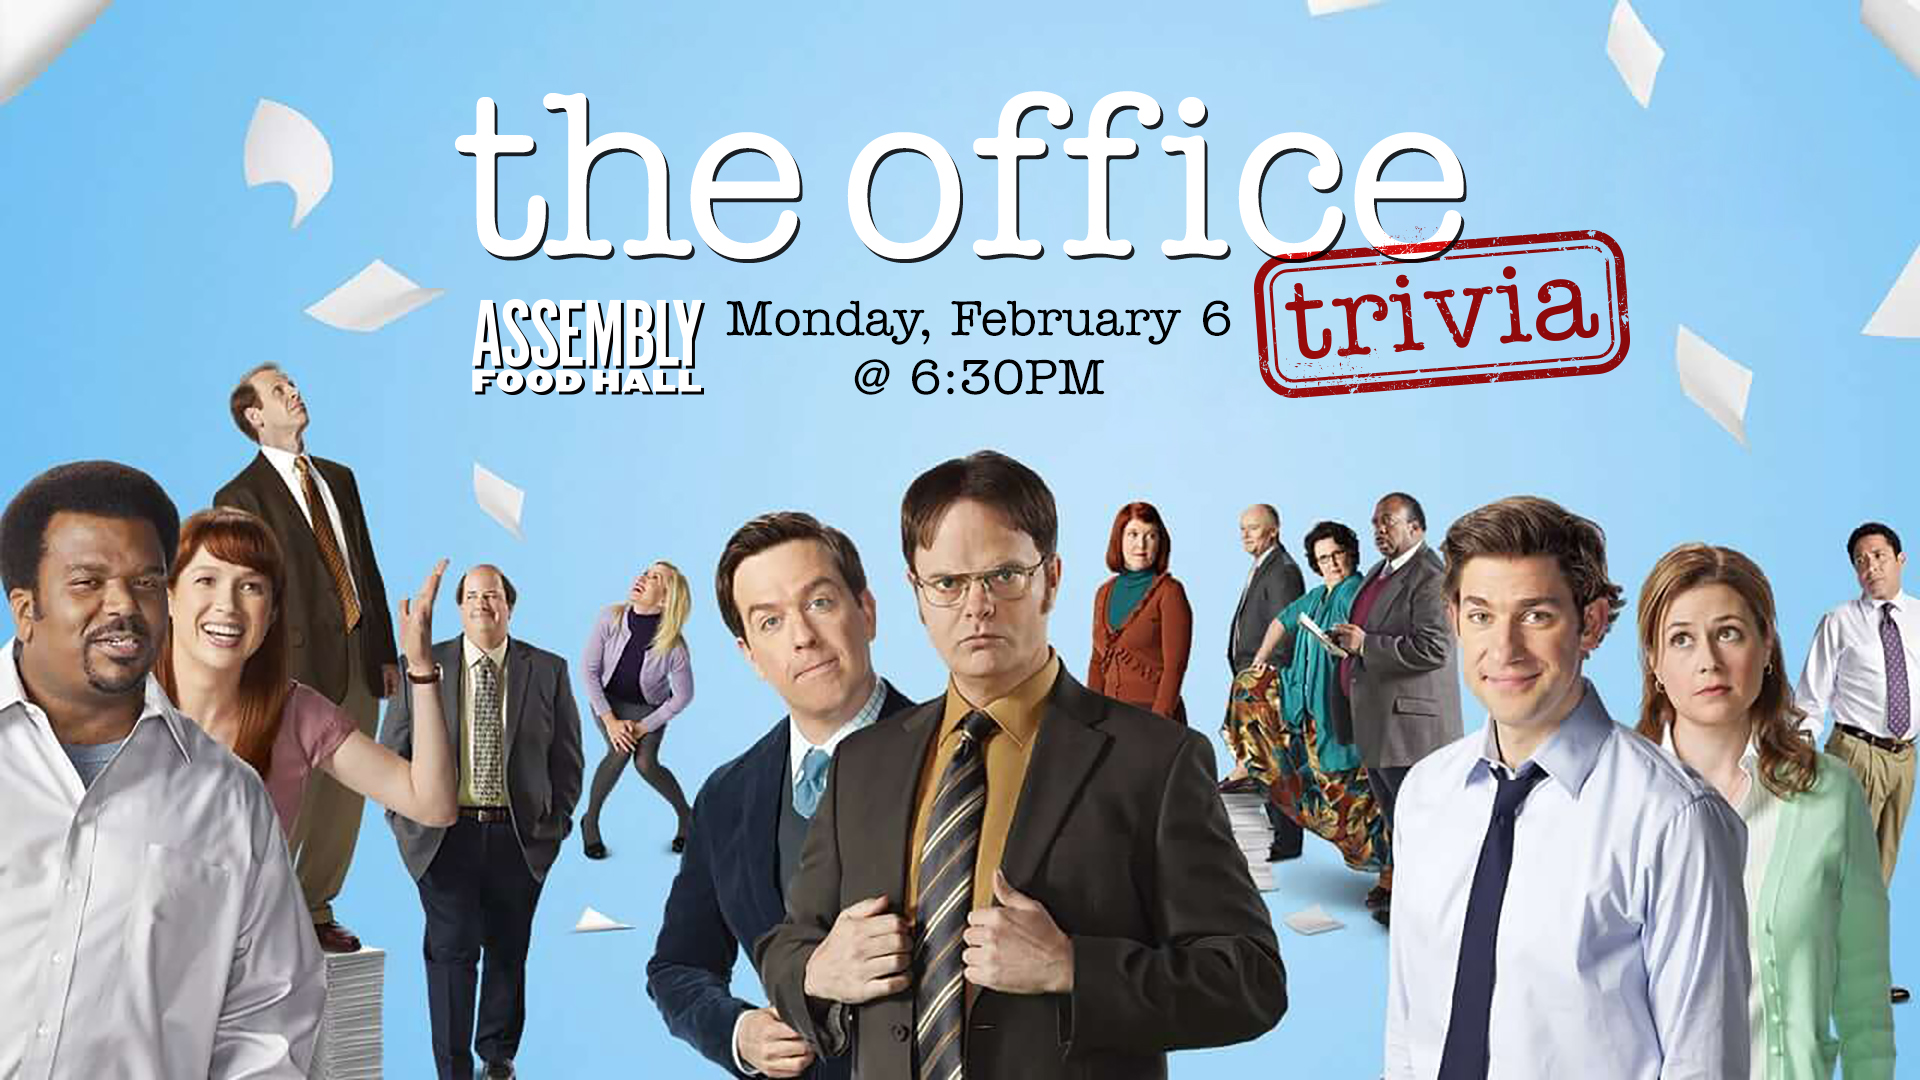 Promo image of The Office Trivia